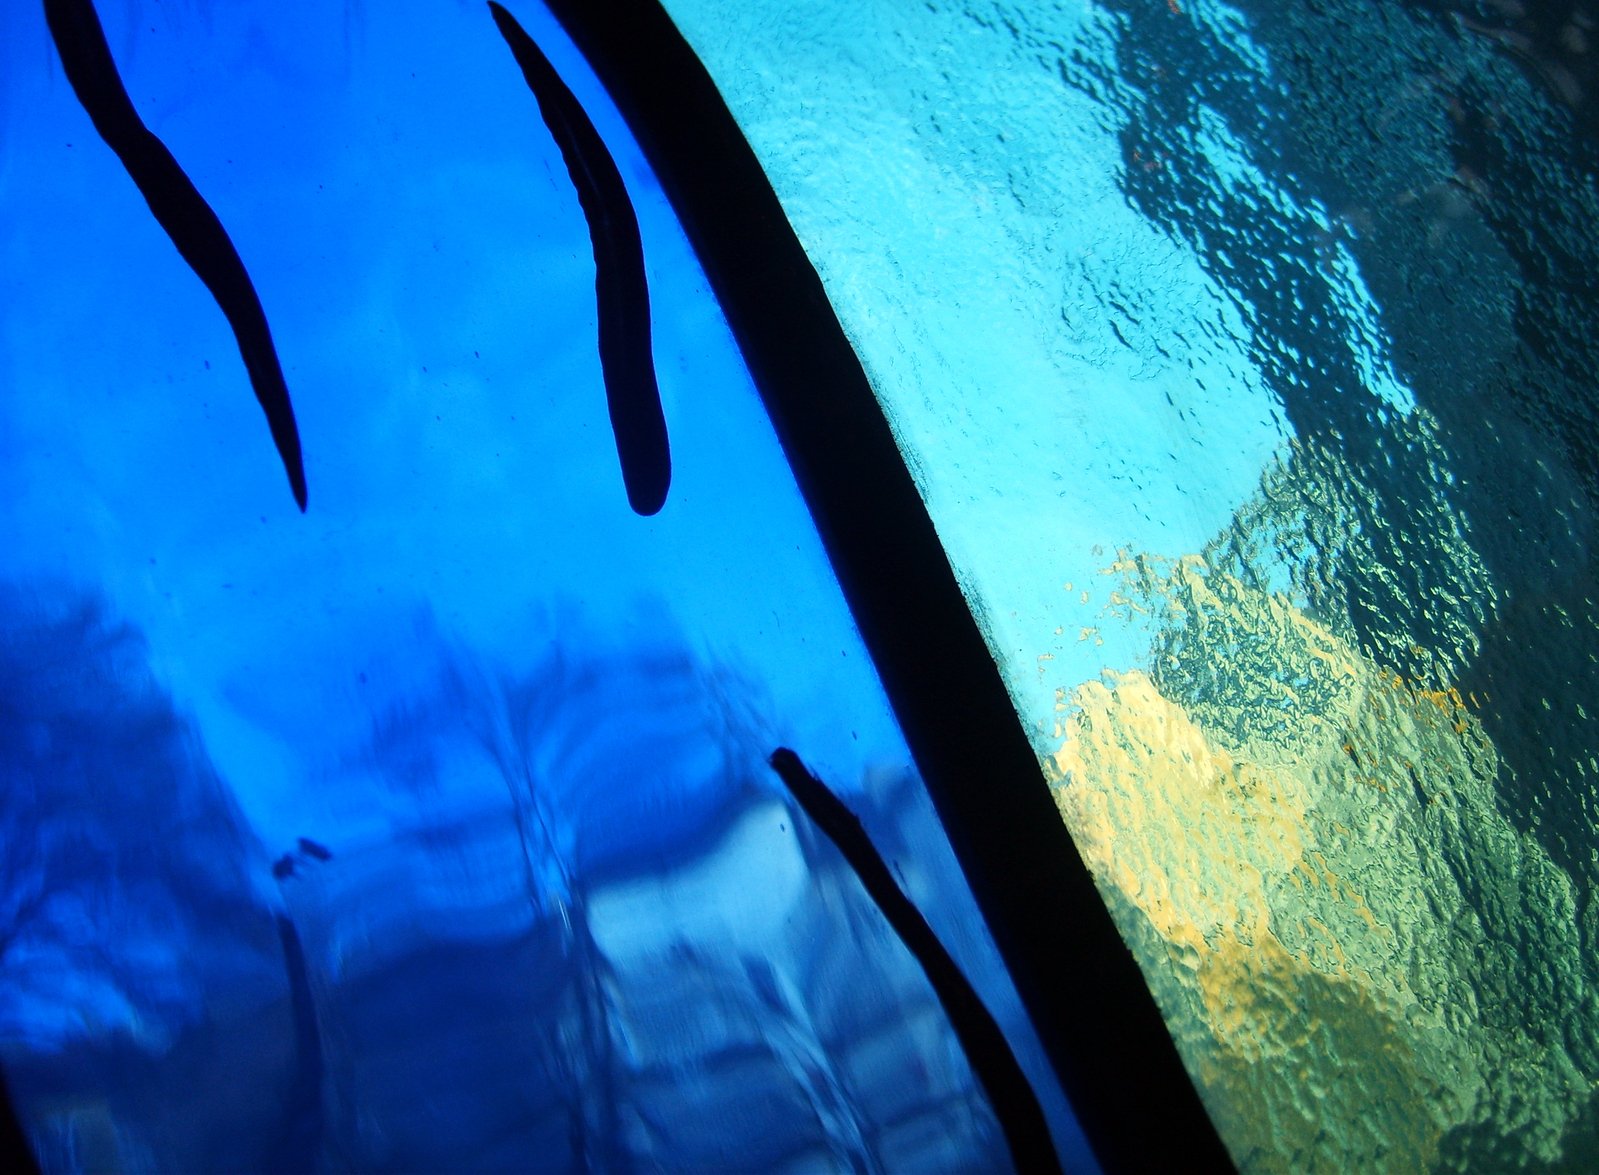 some blue and yellow glass with water reflecting them